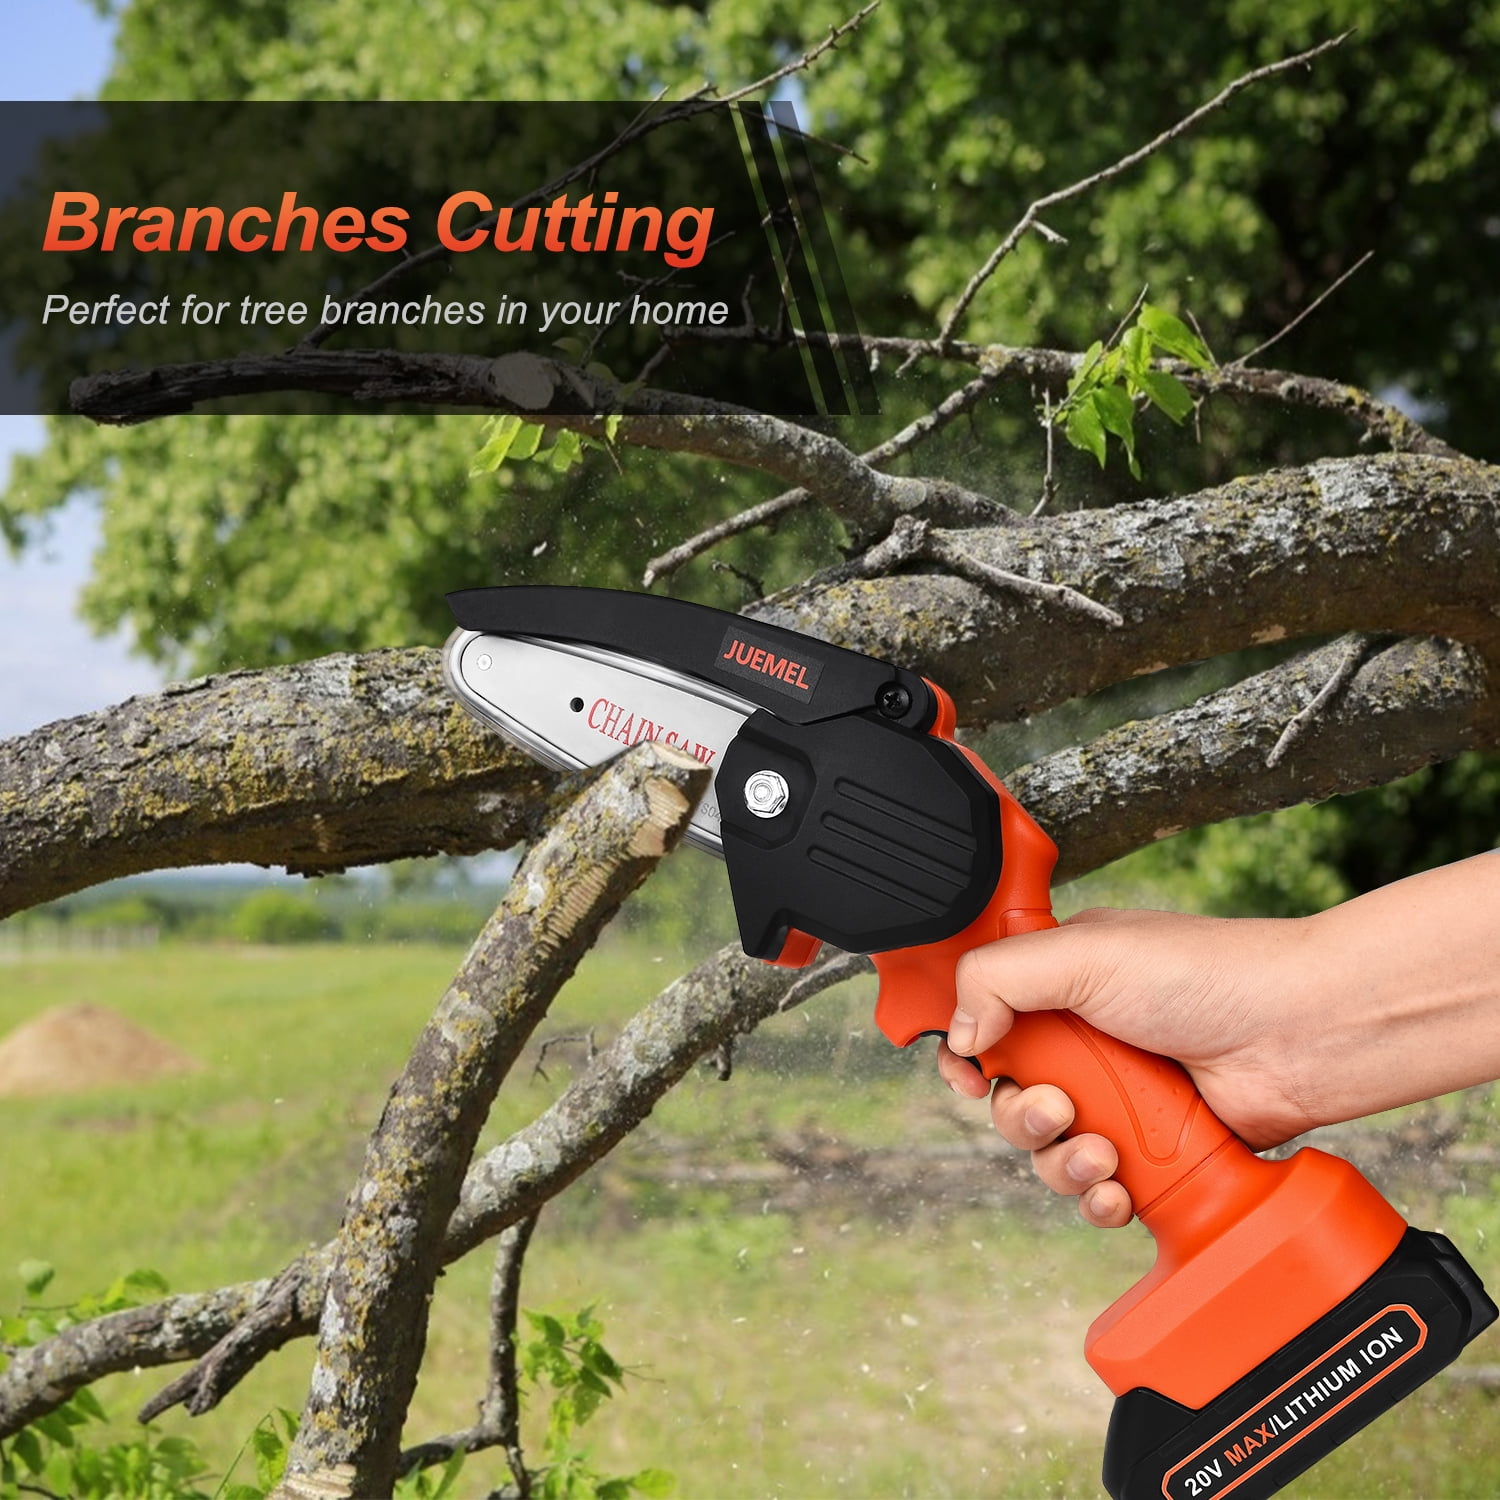 Denqir Mini Chainsaw Review: Testing It Out On Branches, Trees, And Lumber  